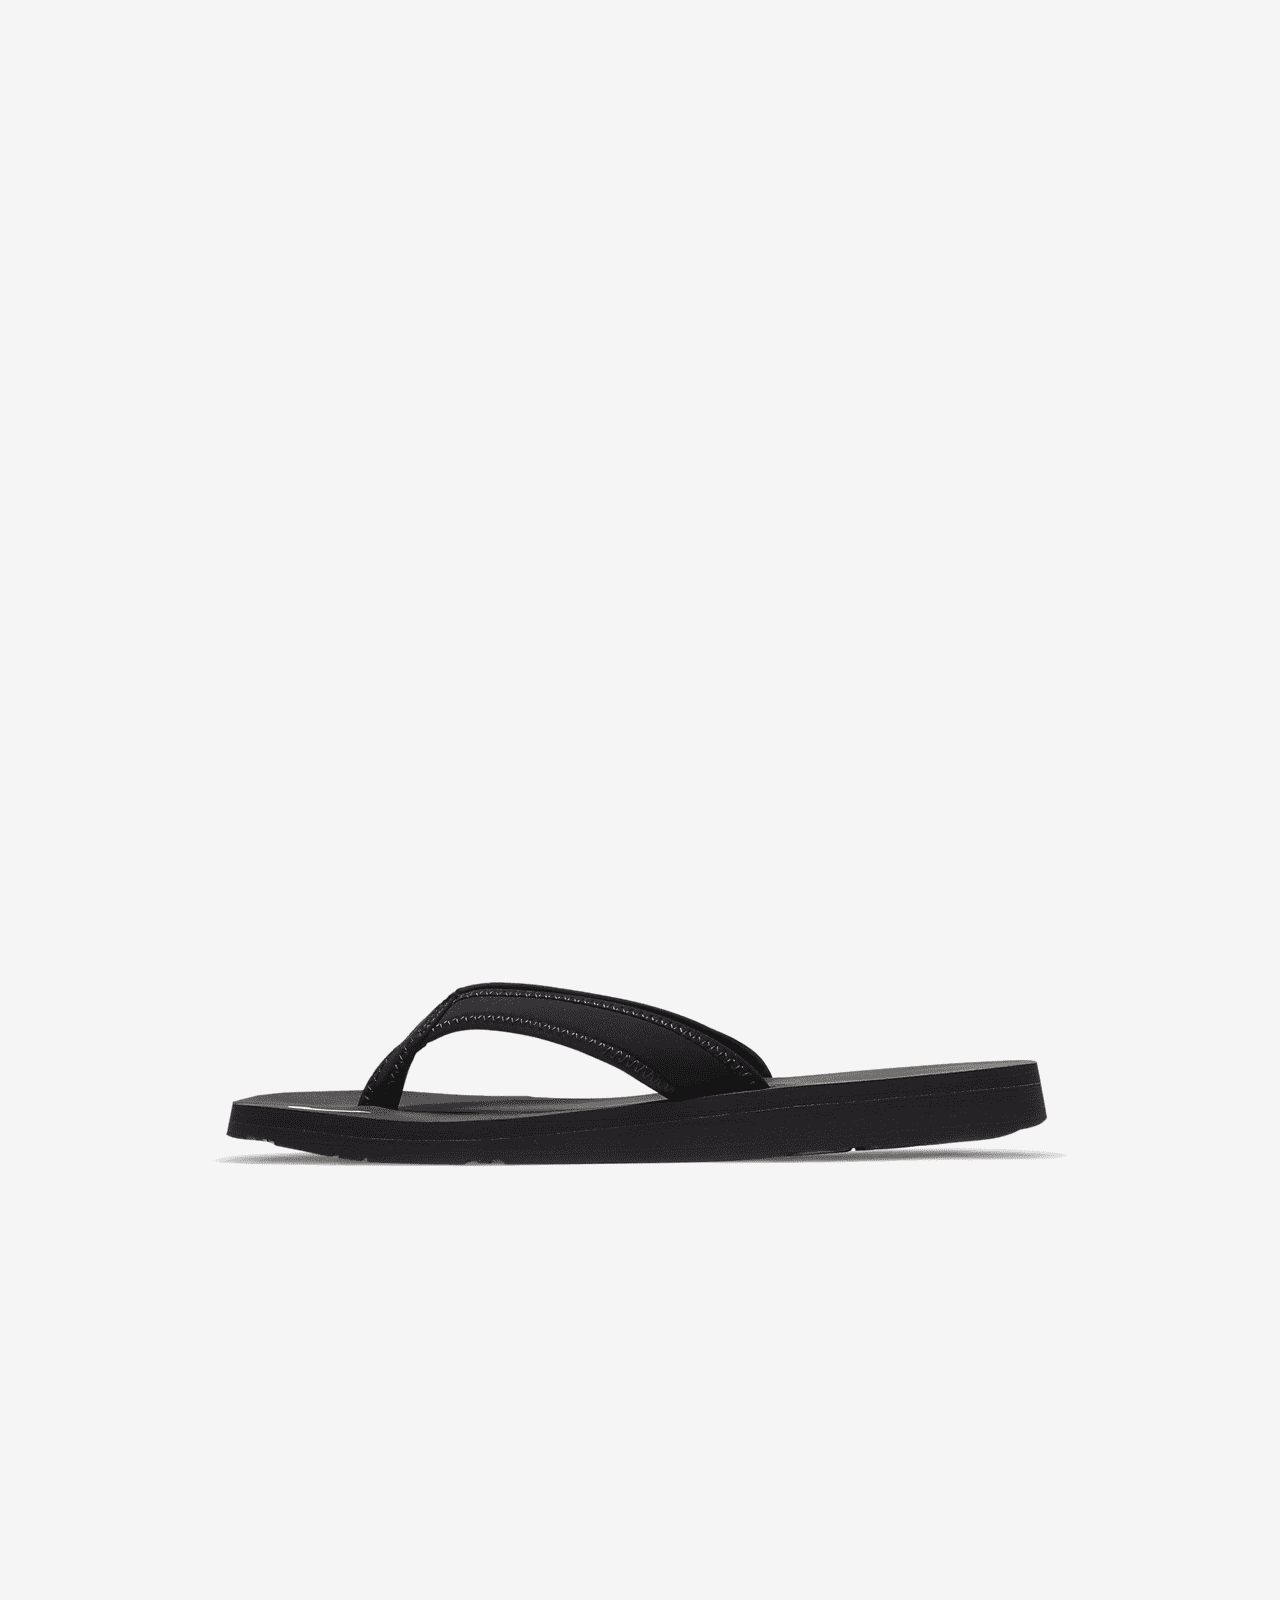 Nike Celso Thong Sandals